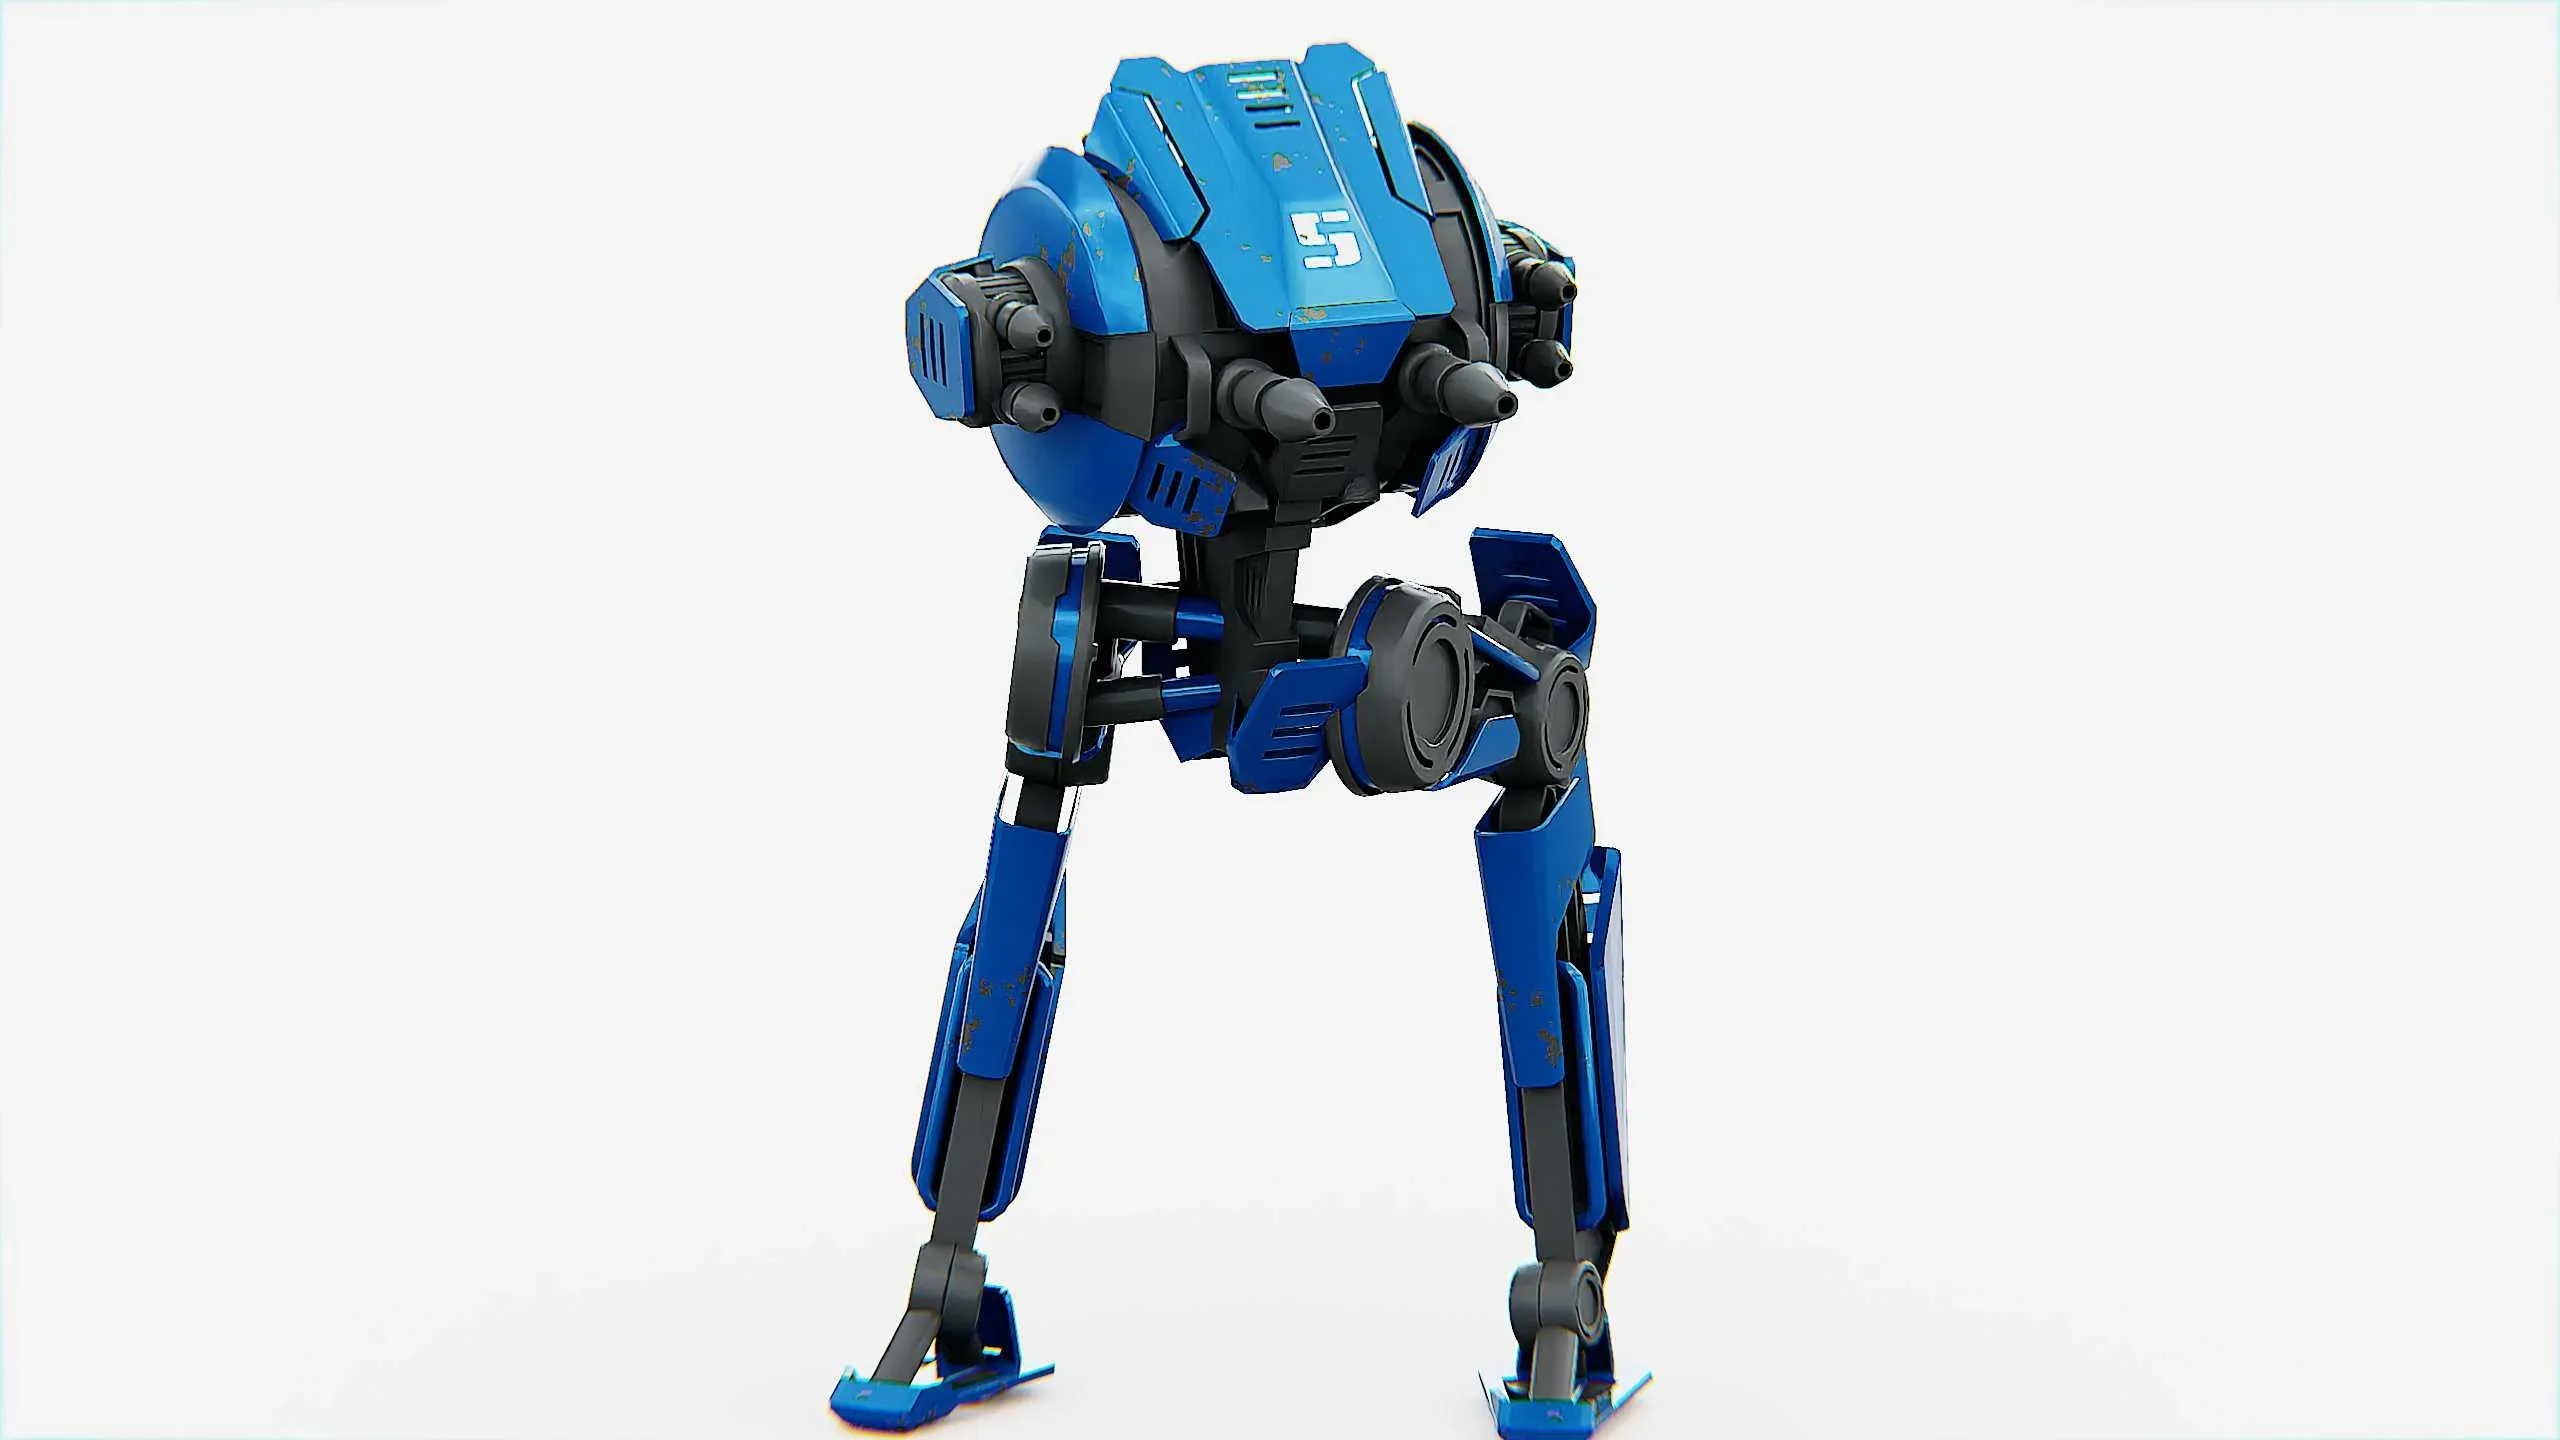 CYCLE WALKER DROID Auto-Rig Pro Rigged For Mixamo, Unreal Engine Unity